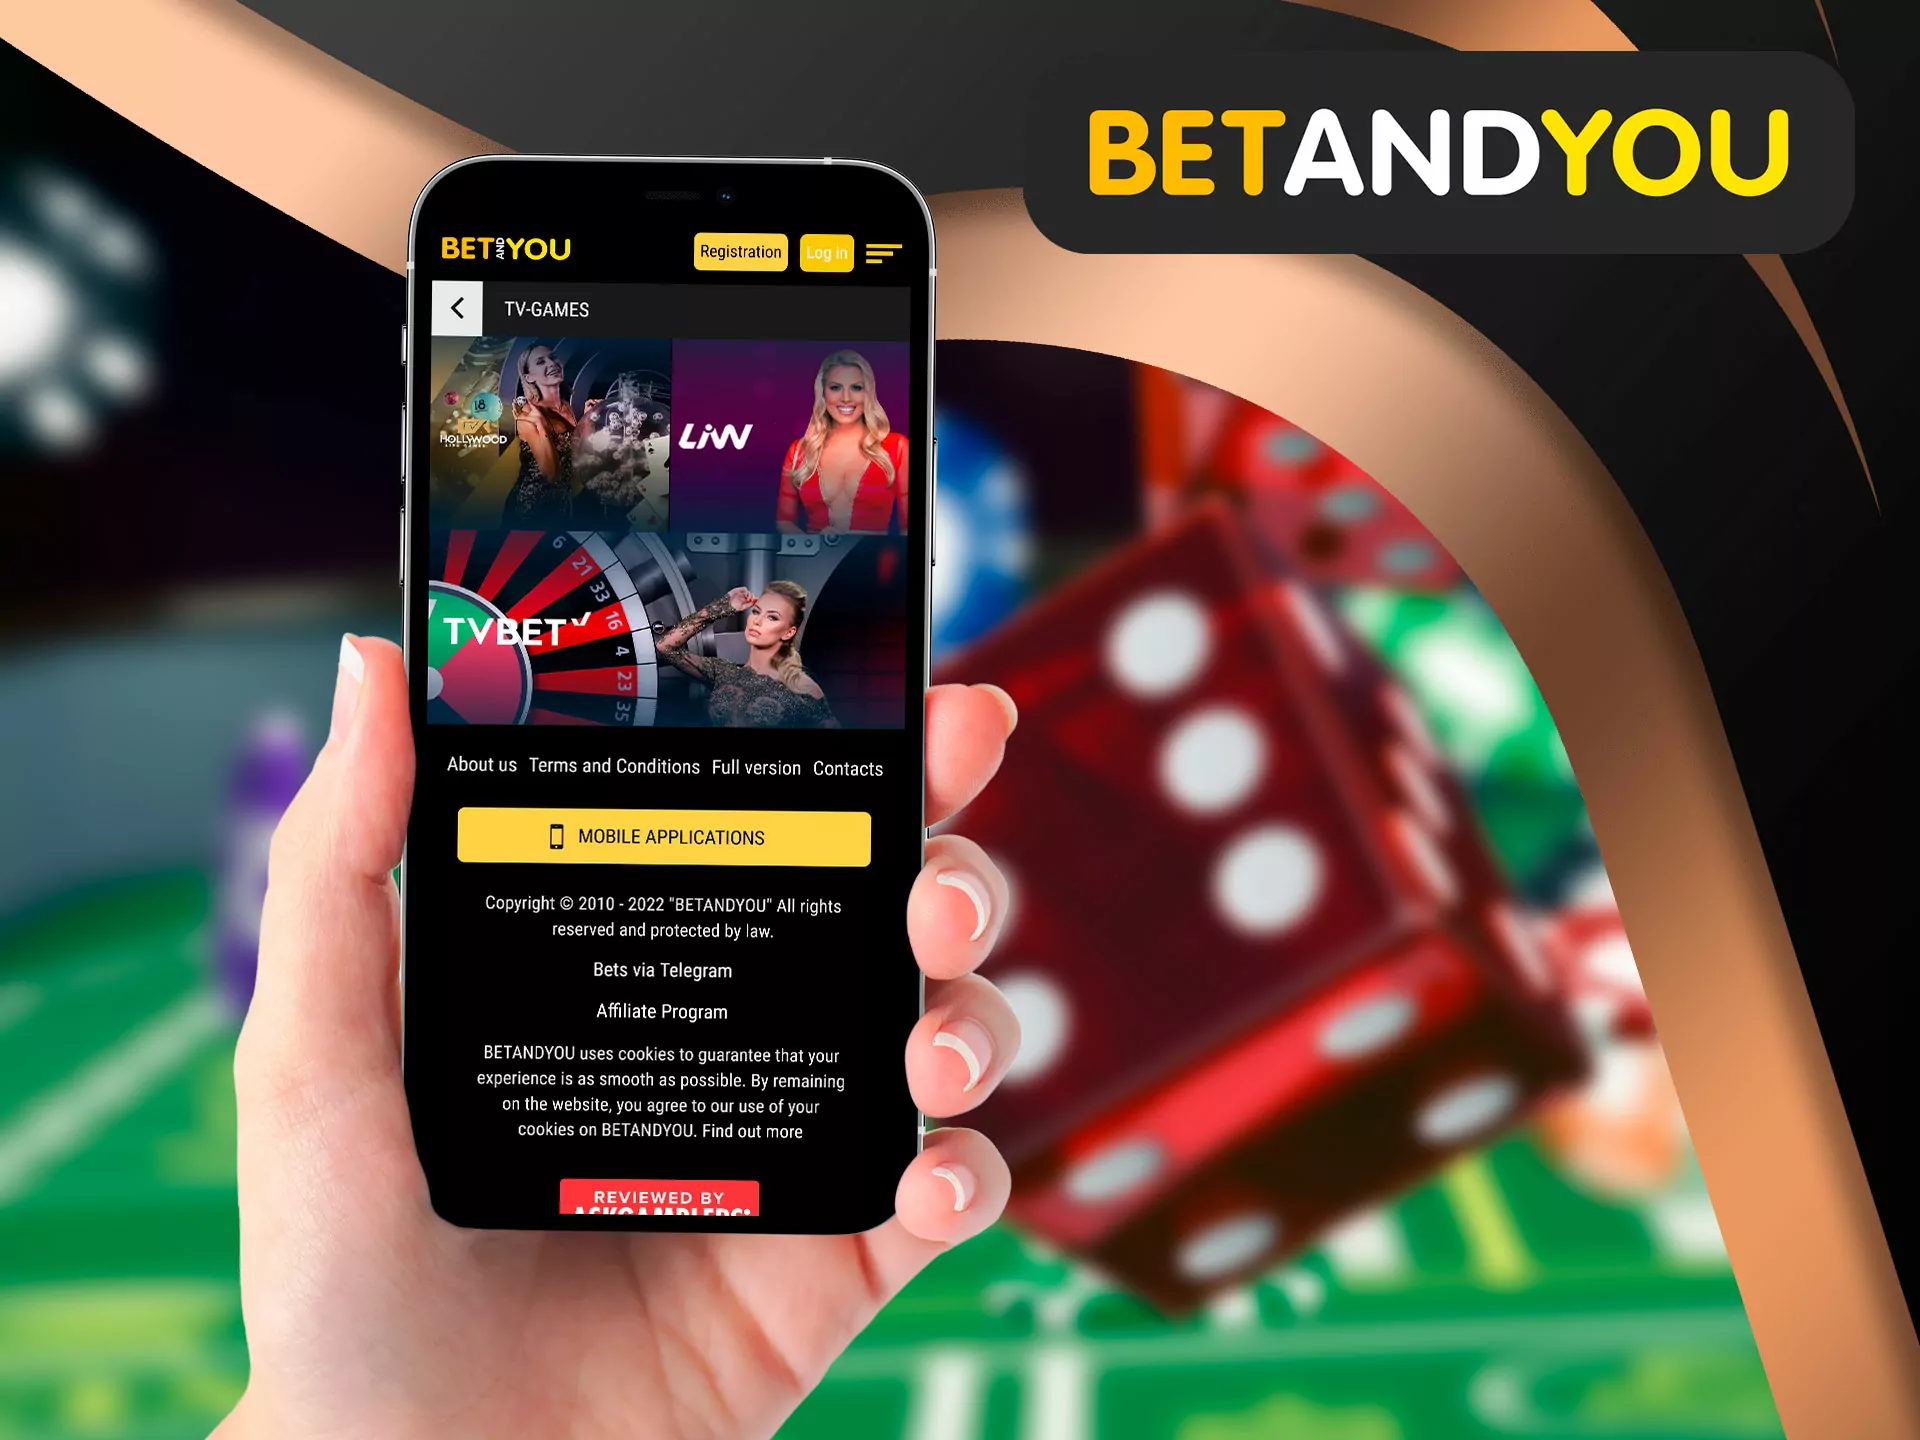 Older players love this game at Betandyou, it's like a TV program that was shown before on the air, the casino brings pleasant nostalgic memories that will not let you get bored.